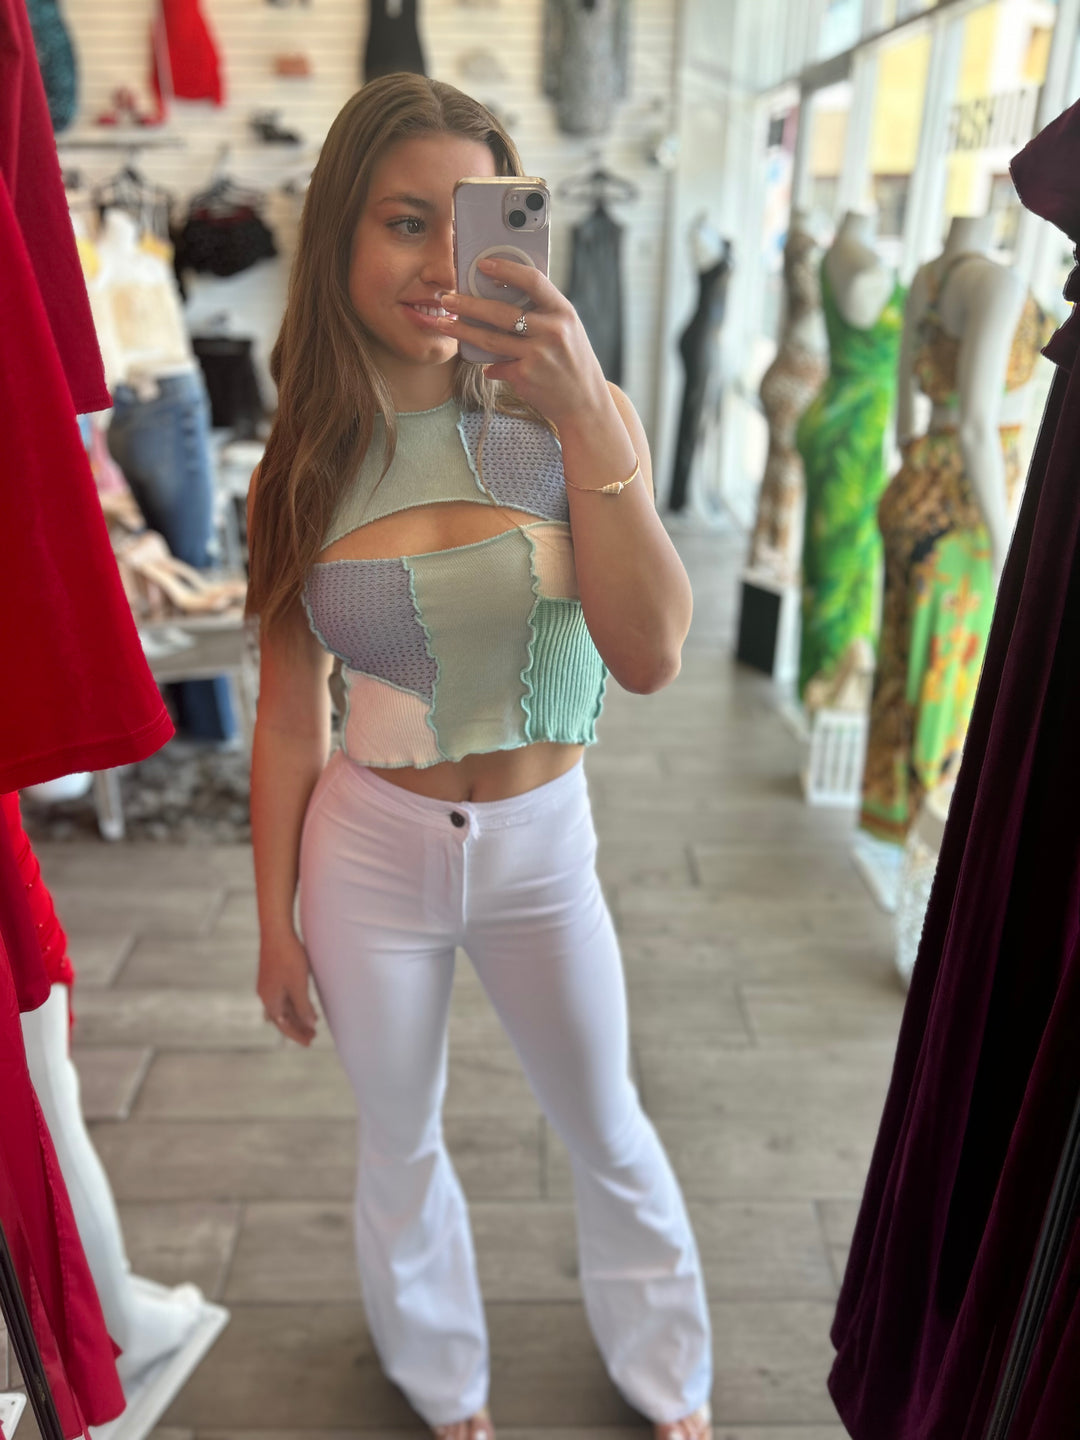 FRESH START Stretchy High Waisted Flared Jeans-Pants-JCJQ Jeans-Malandra Boutique, Women's Fashion Boutique Located in Las Vegas, NV